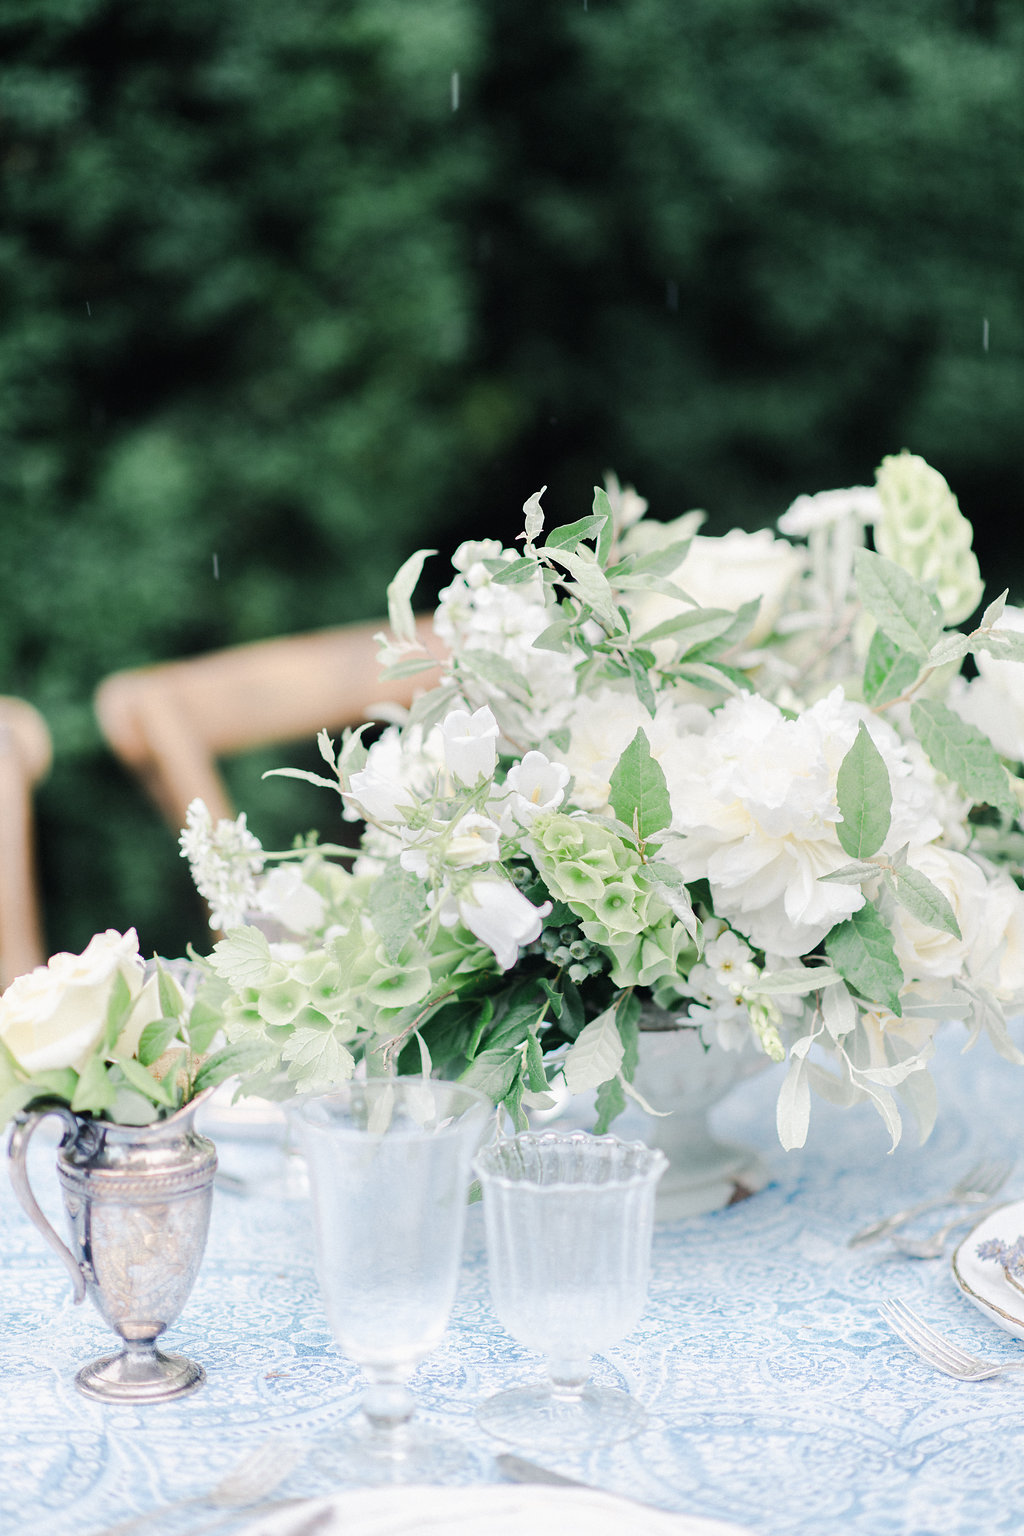 white and green floral centerpiece on table with glassware